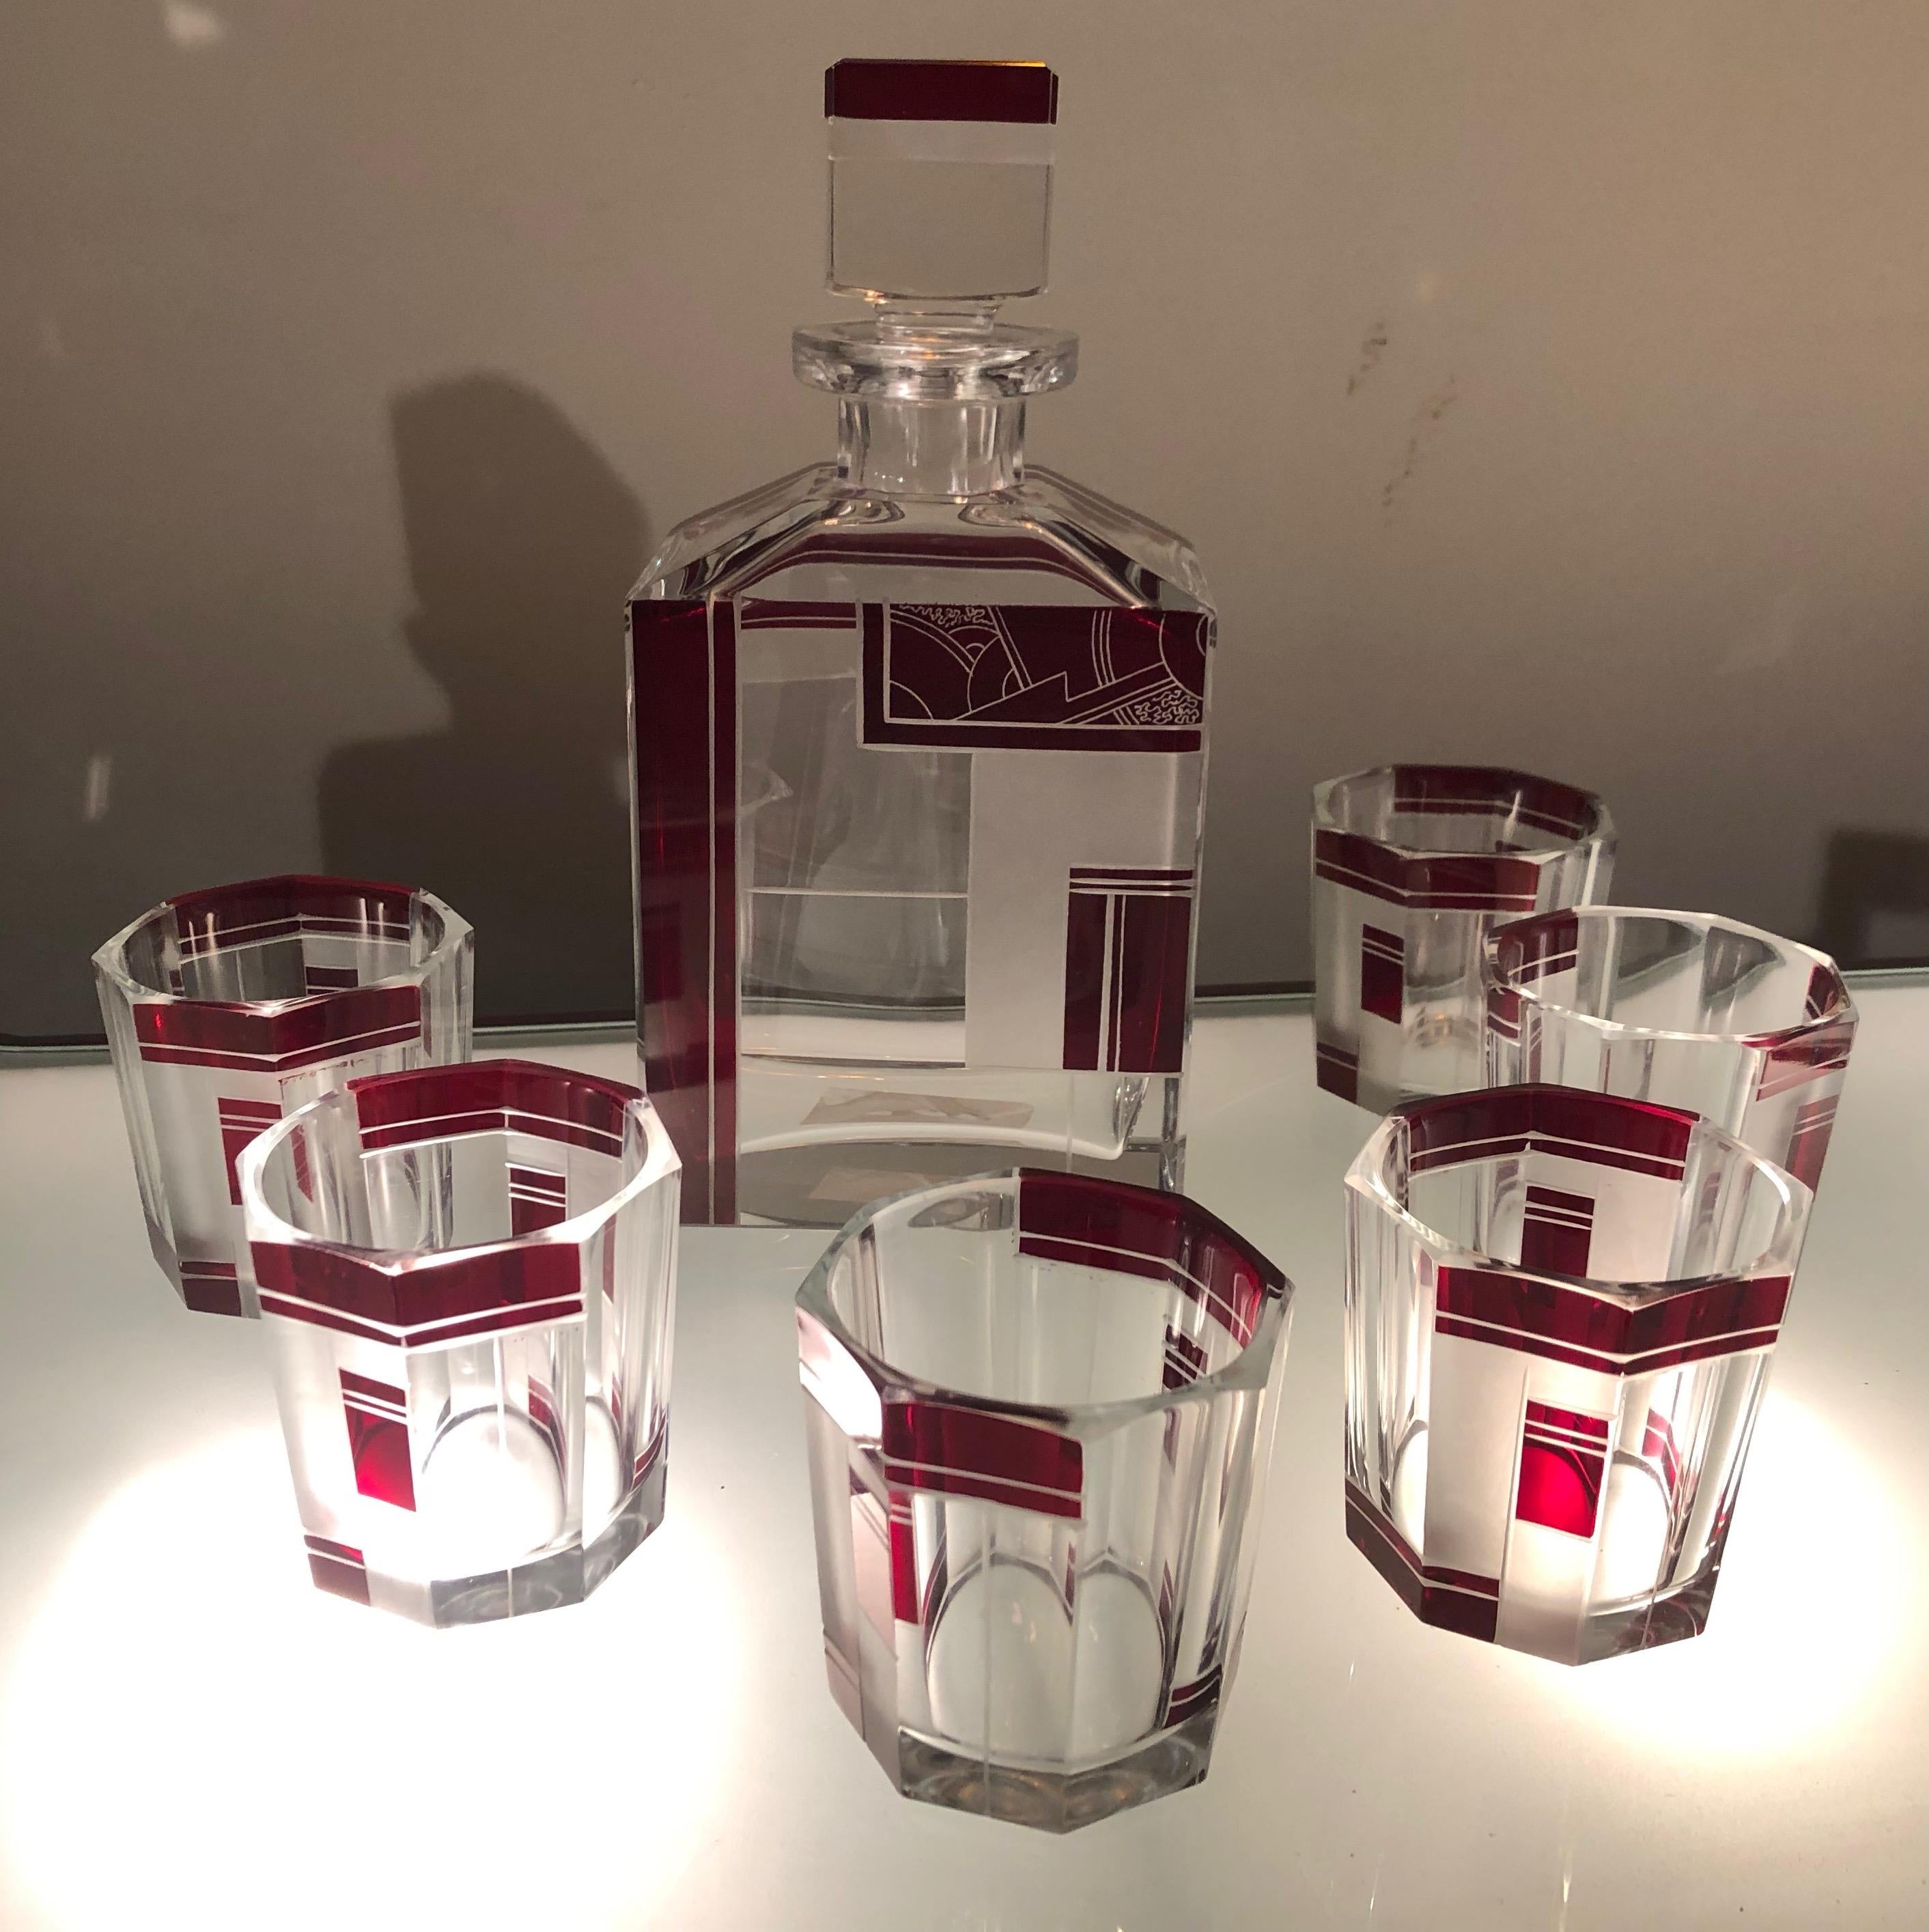 Art Deco Czechoslovakian decanter and six glasses from 1930, beautifully etched in heavy crystal. What makes this set quite special is the size and heft of the glasses, being enough for a serious drink, not just a sip of aperitif. It has a pleasing